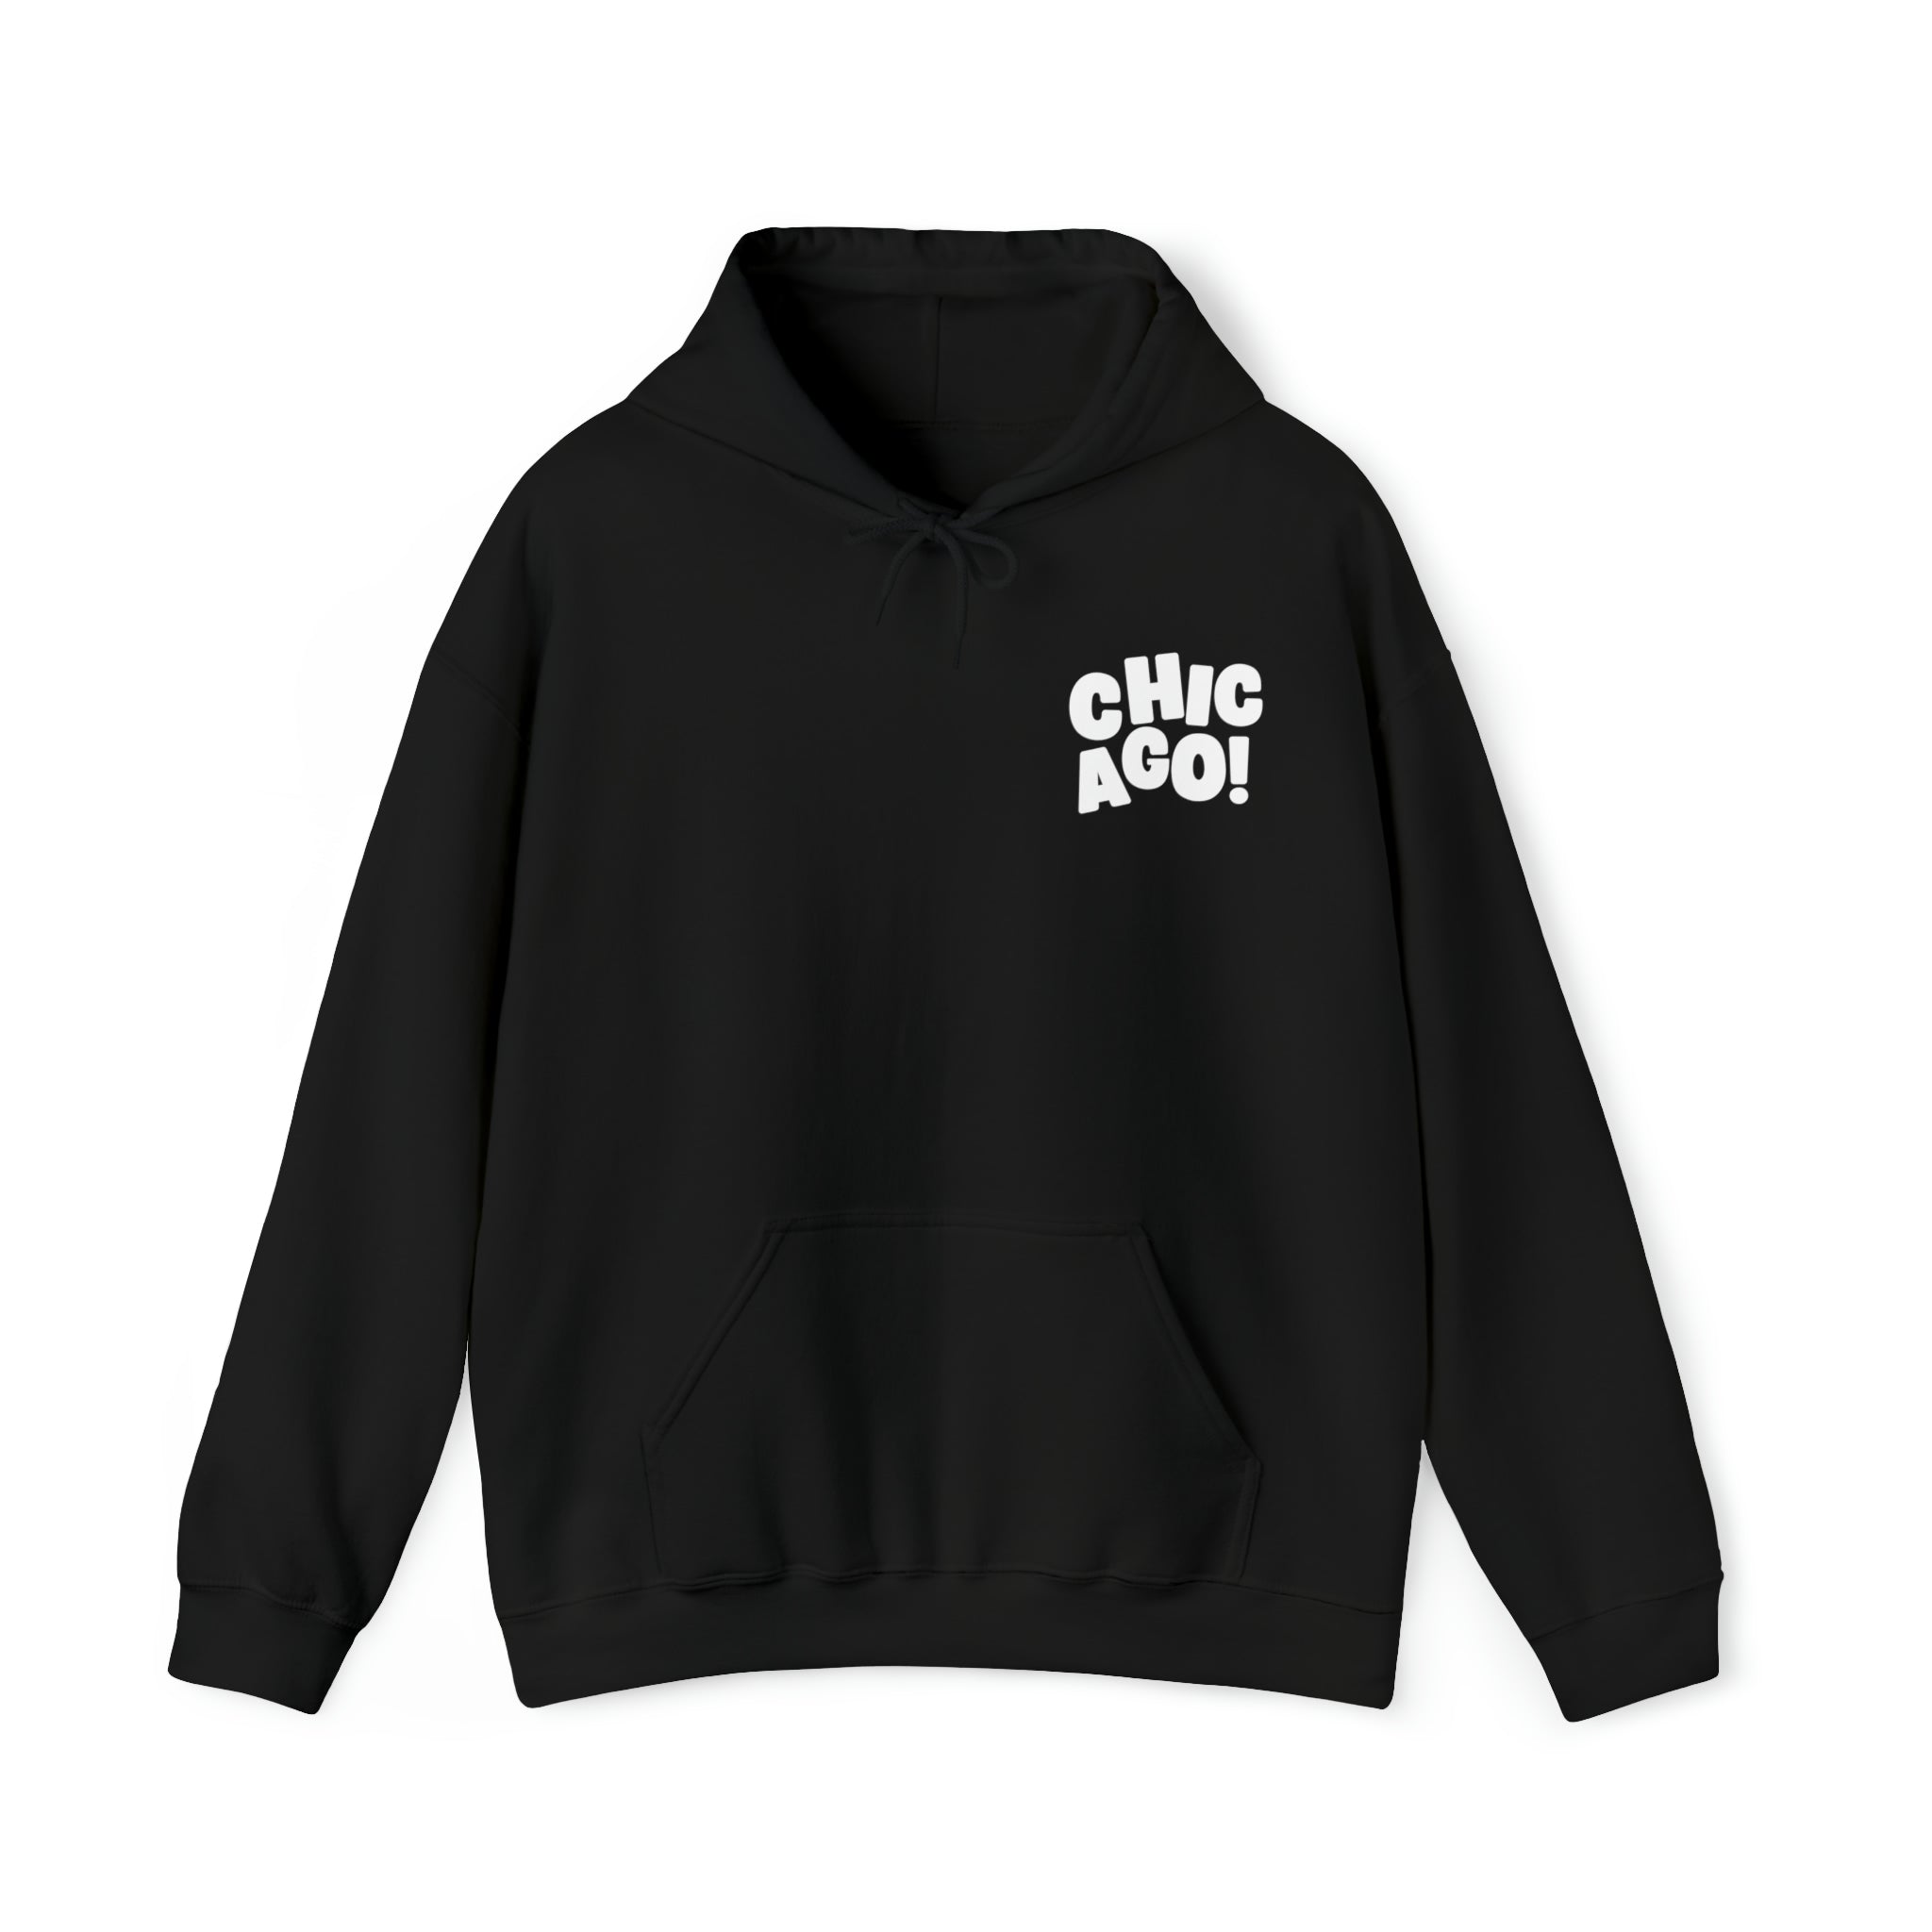 Men's Chicago-themed hoodie